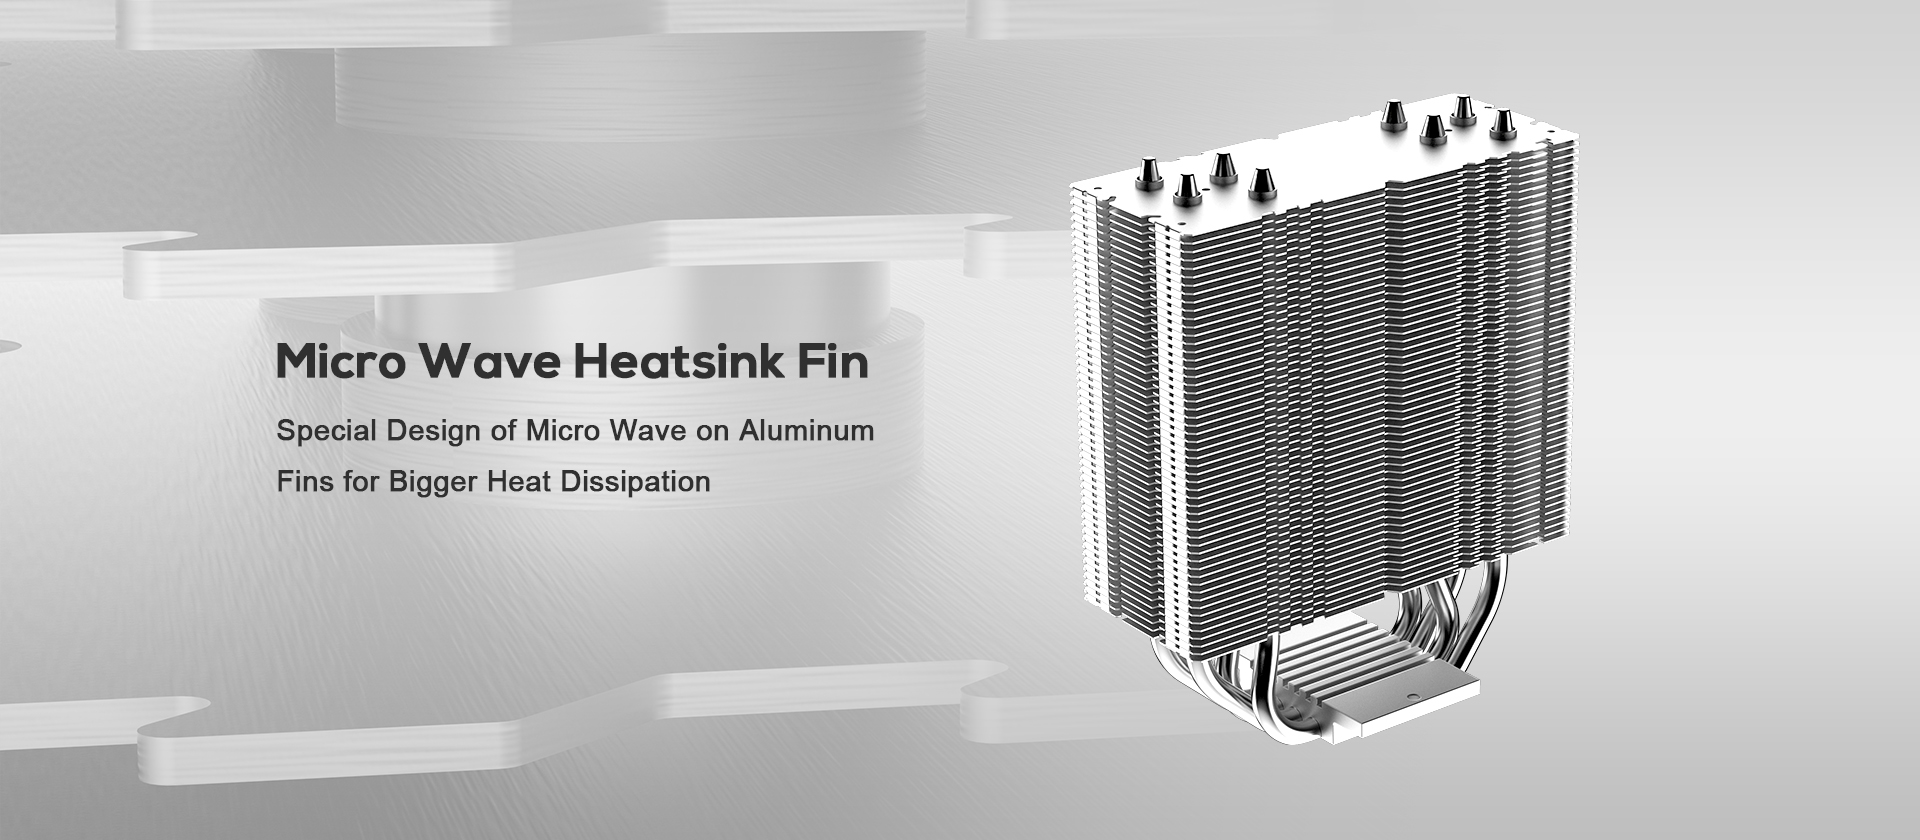 A large marketing image providing additional information about the product ID-COOLING Sweden Series SE-224-XTS CPU Cooler - Additional alt info not provided